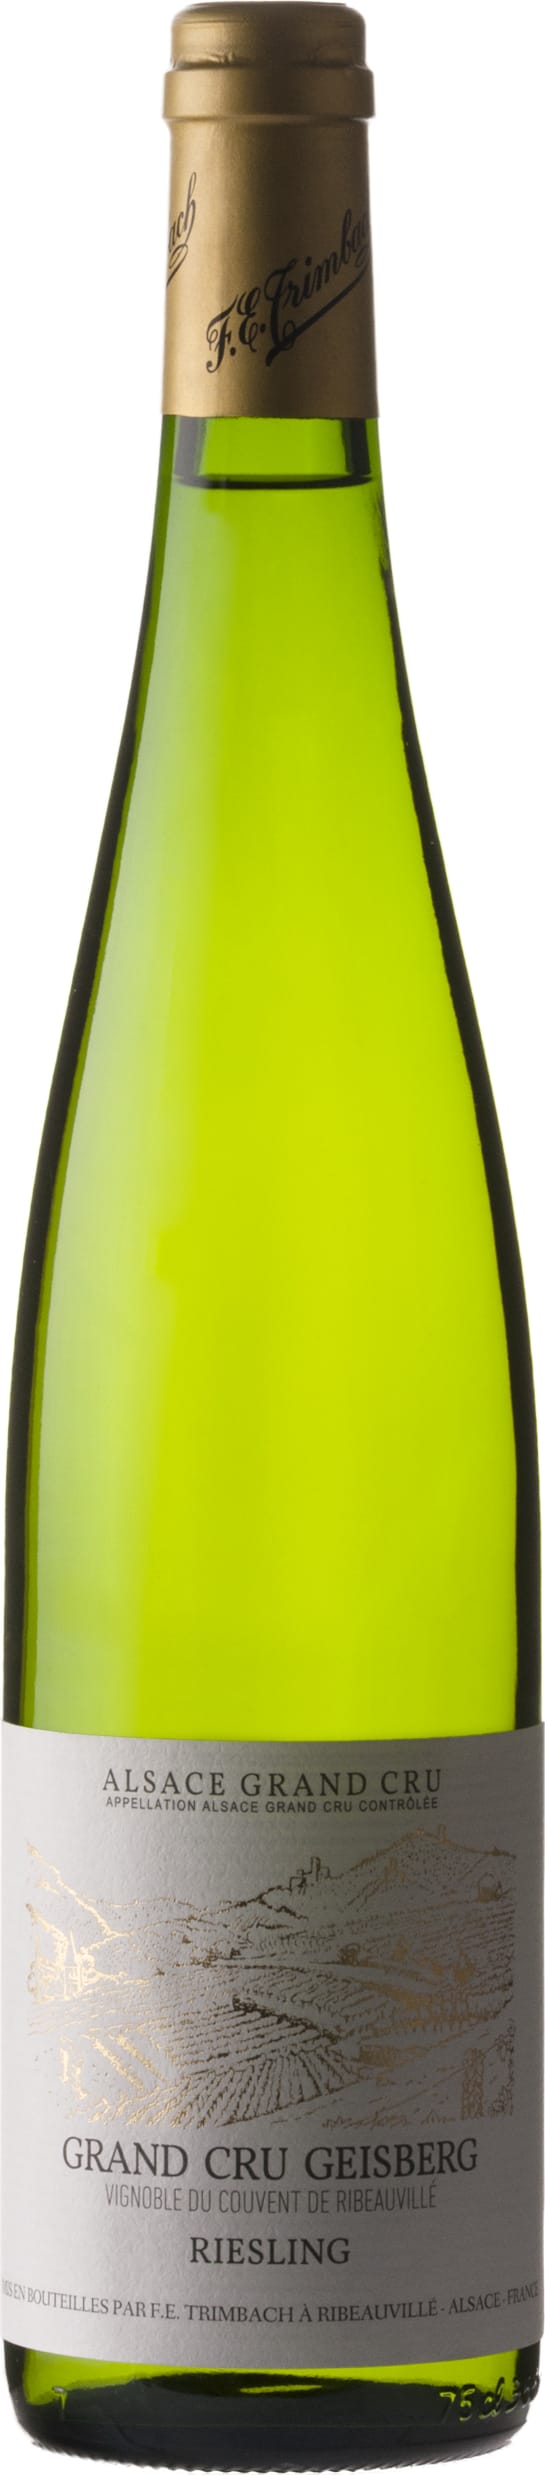 Trimbach Riesling Grand Cru Geisberg 2017 75cl - Buy Trimbach Wines from GREAT WINES DIRECT wine shop